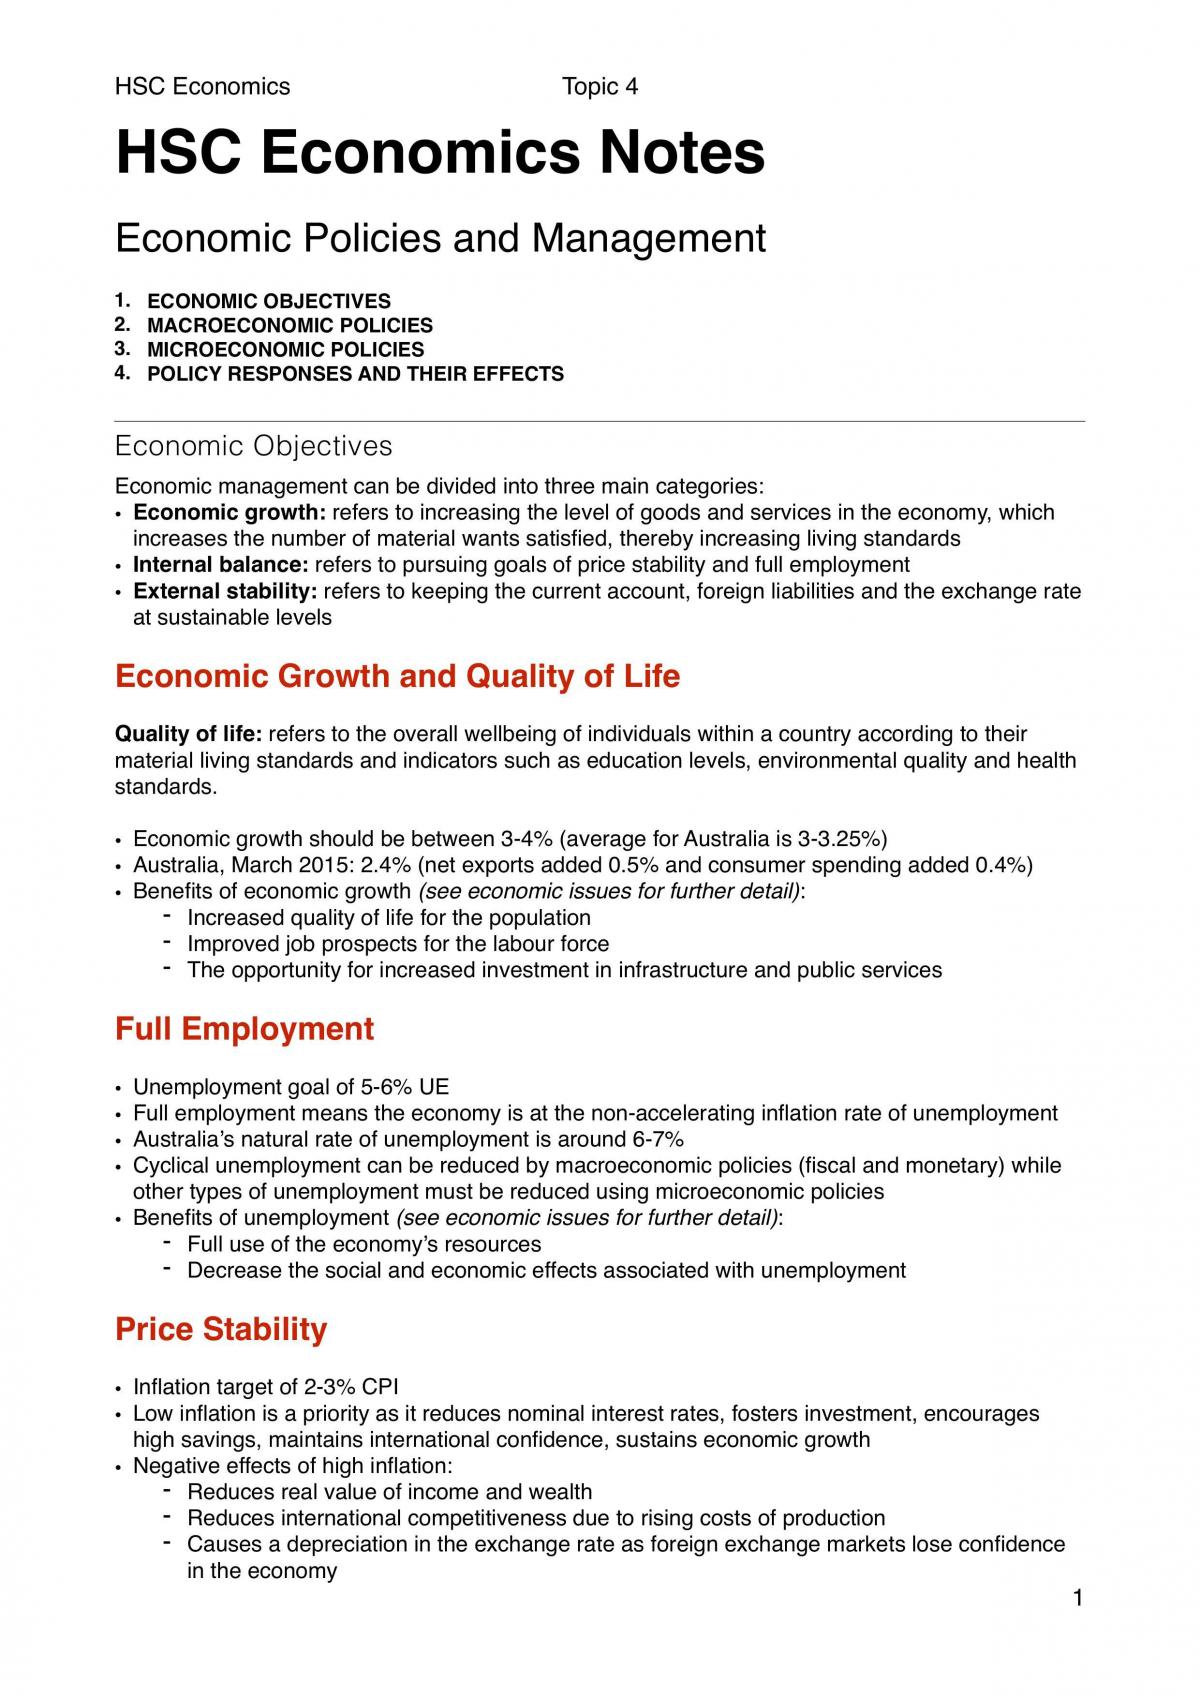 Economic Policies and Management - Page 1